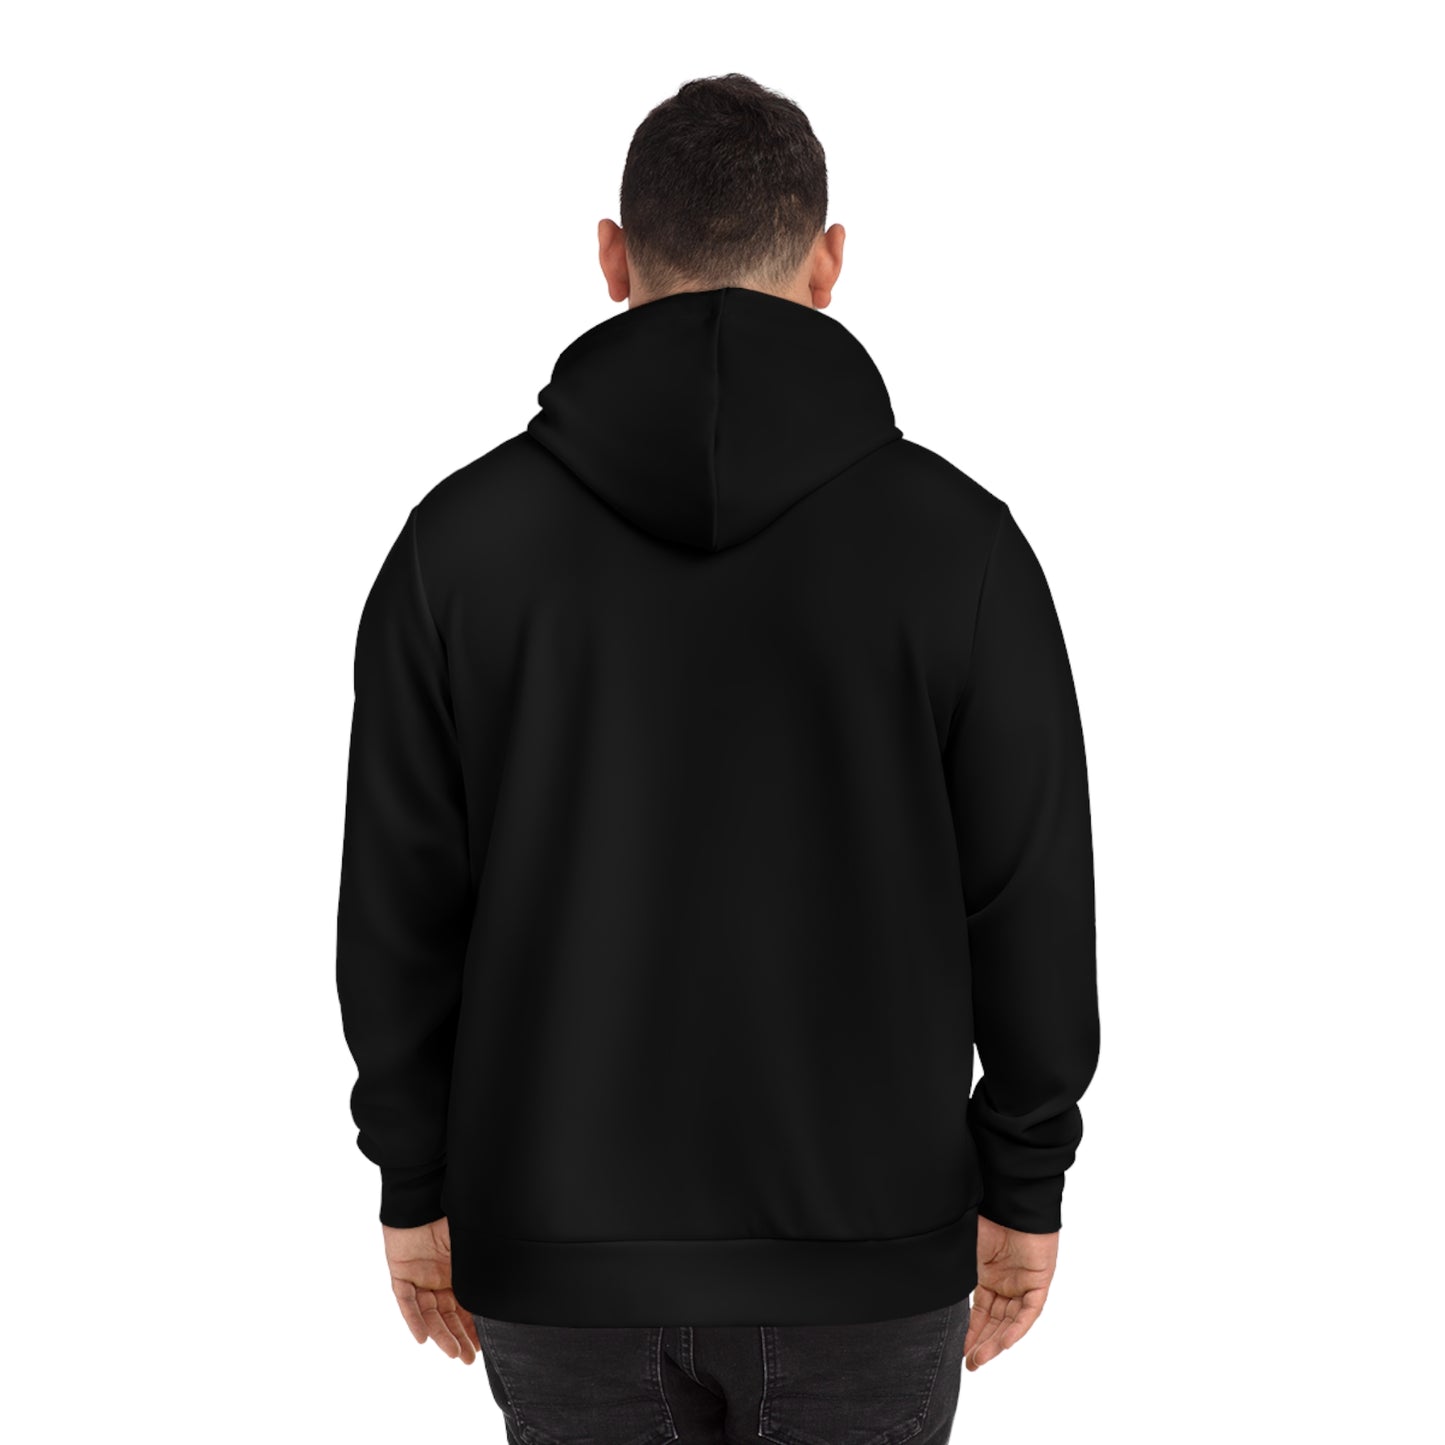 Heaven Authenticity Fashion Hoodie